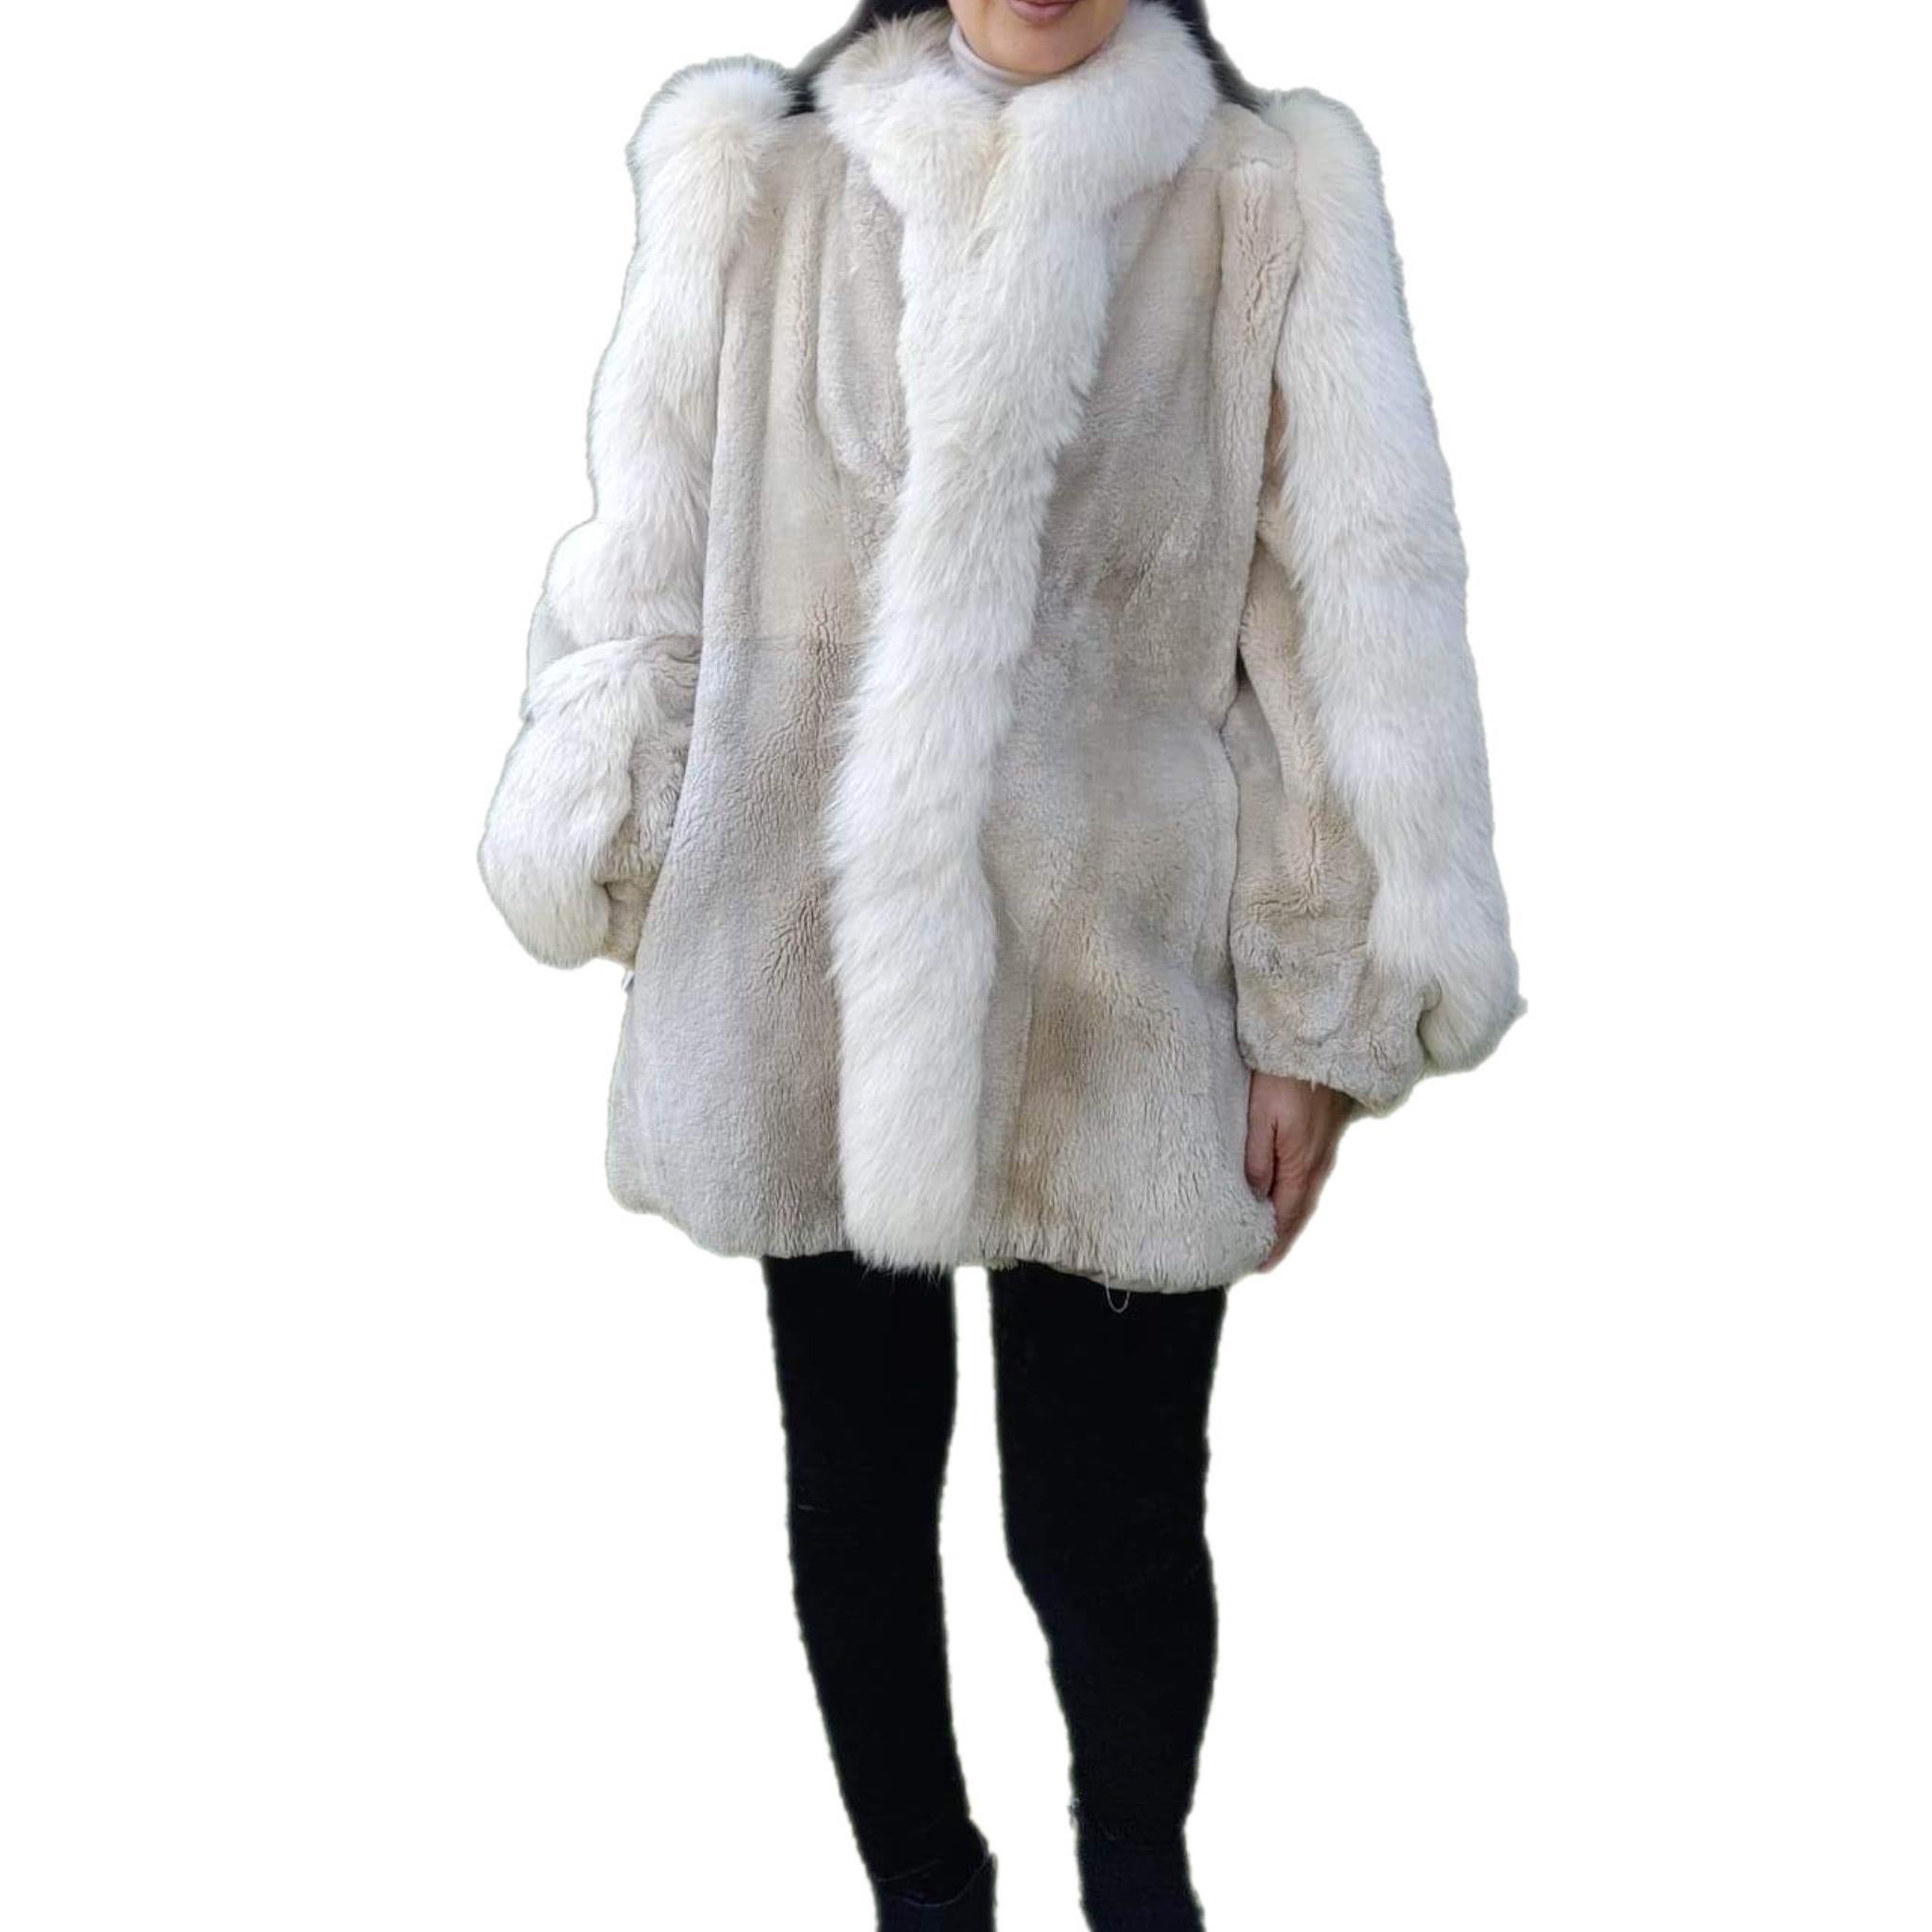 Women's Sheared Beaver Fur Coat with Fur Trim (Size 8-M) For Sale